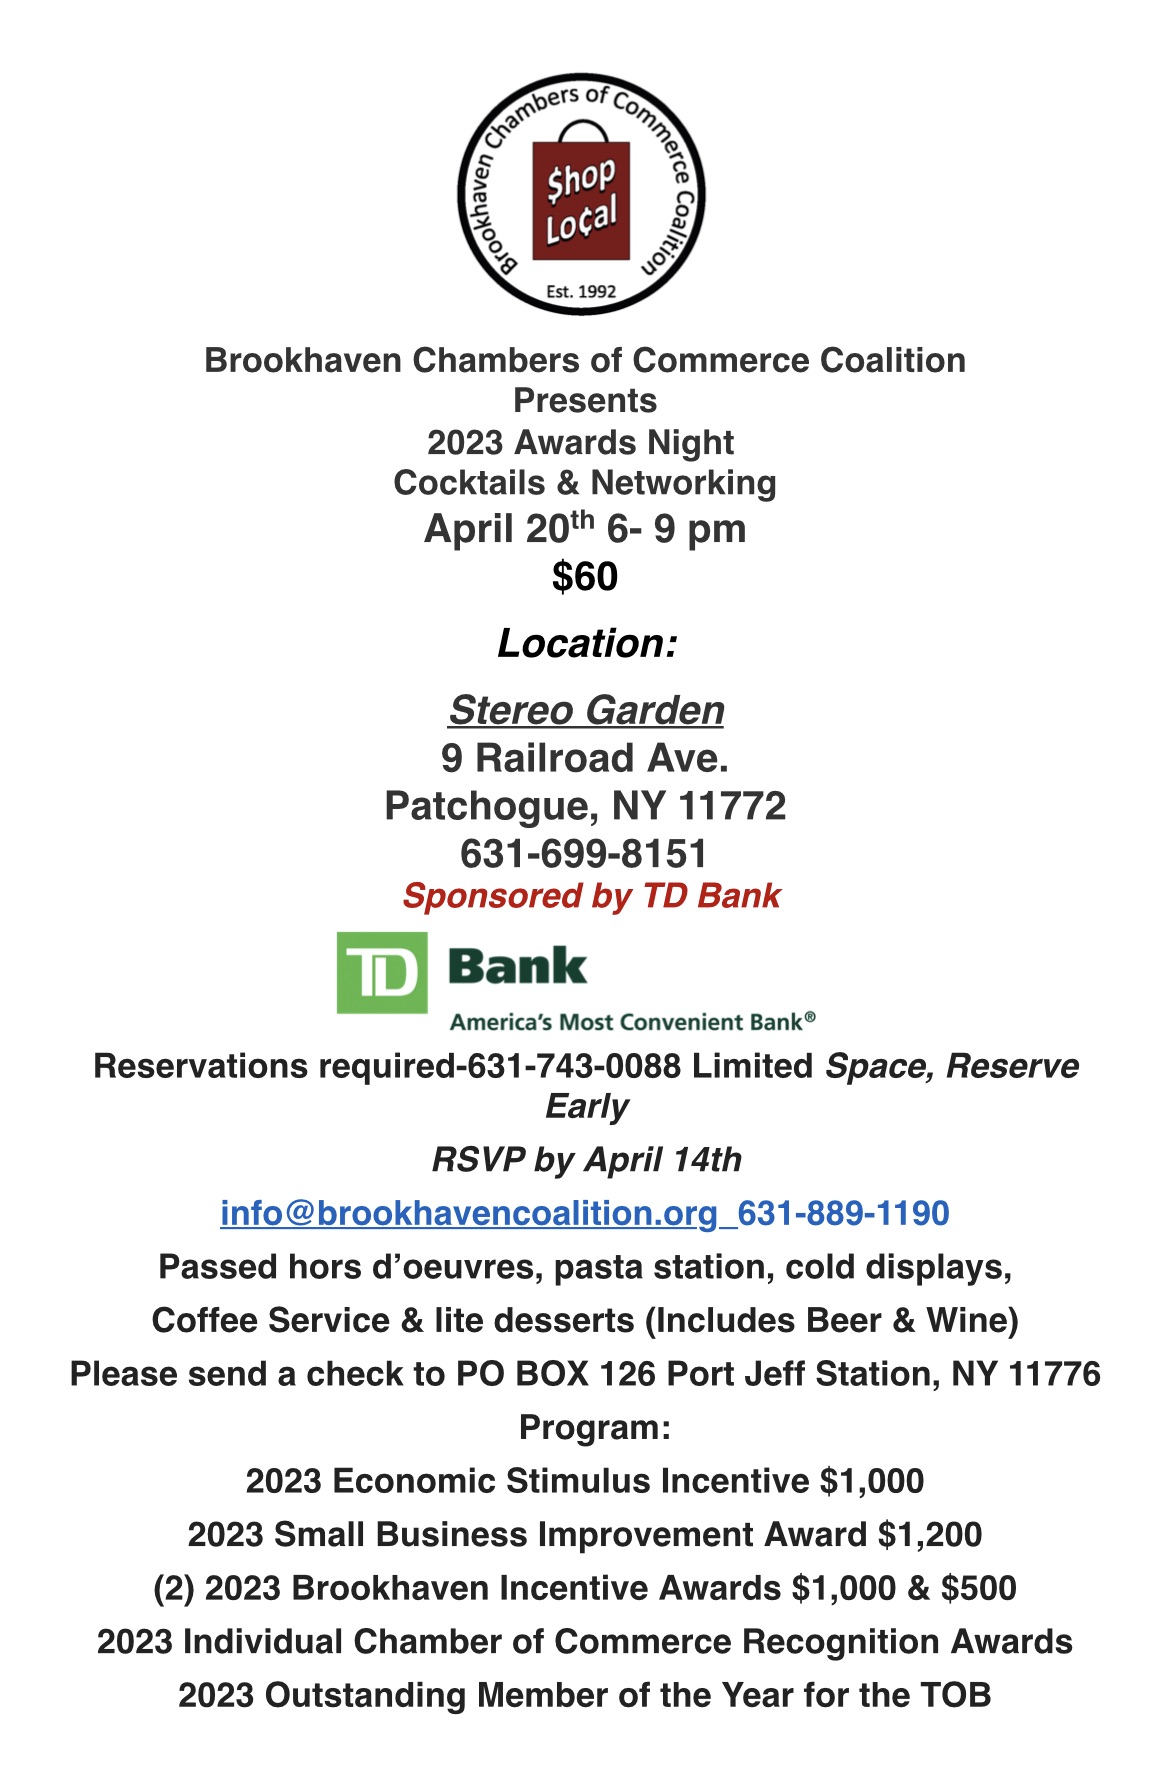 Brookhaven Chamber of Commerce